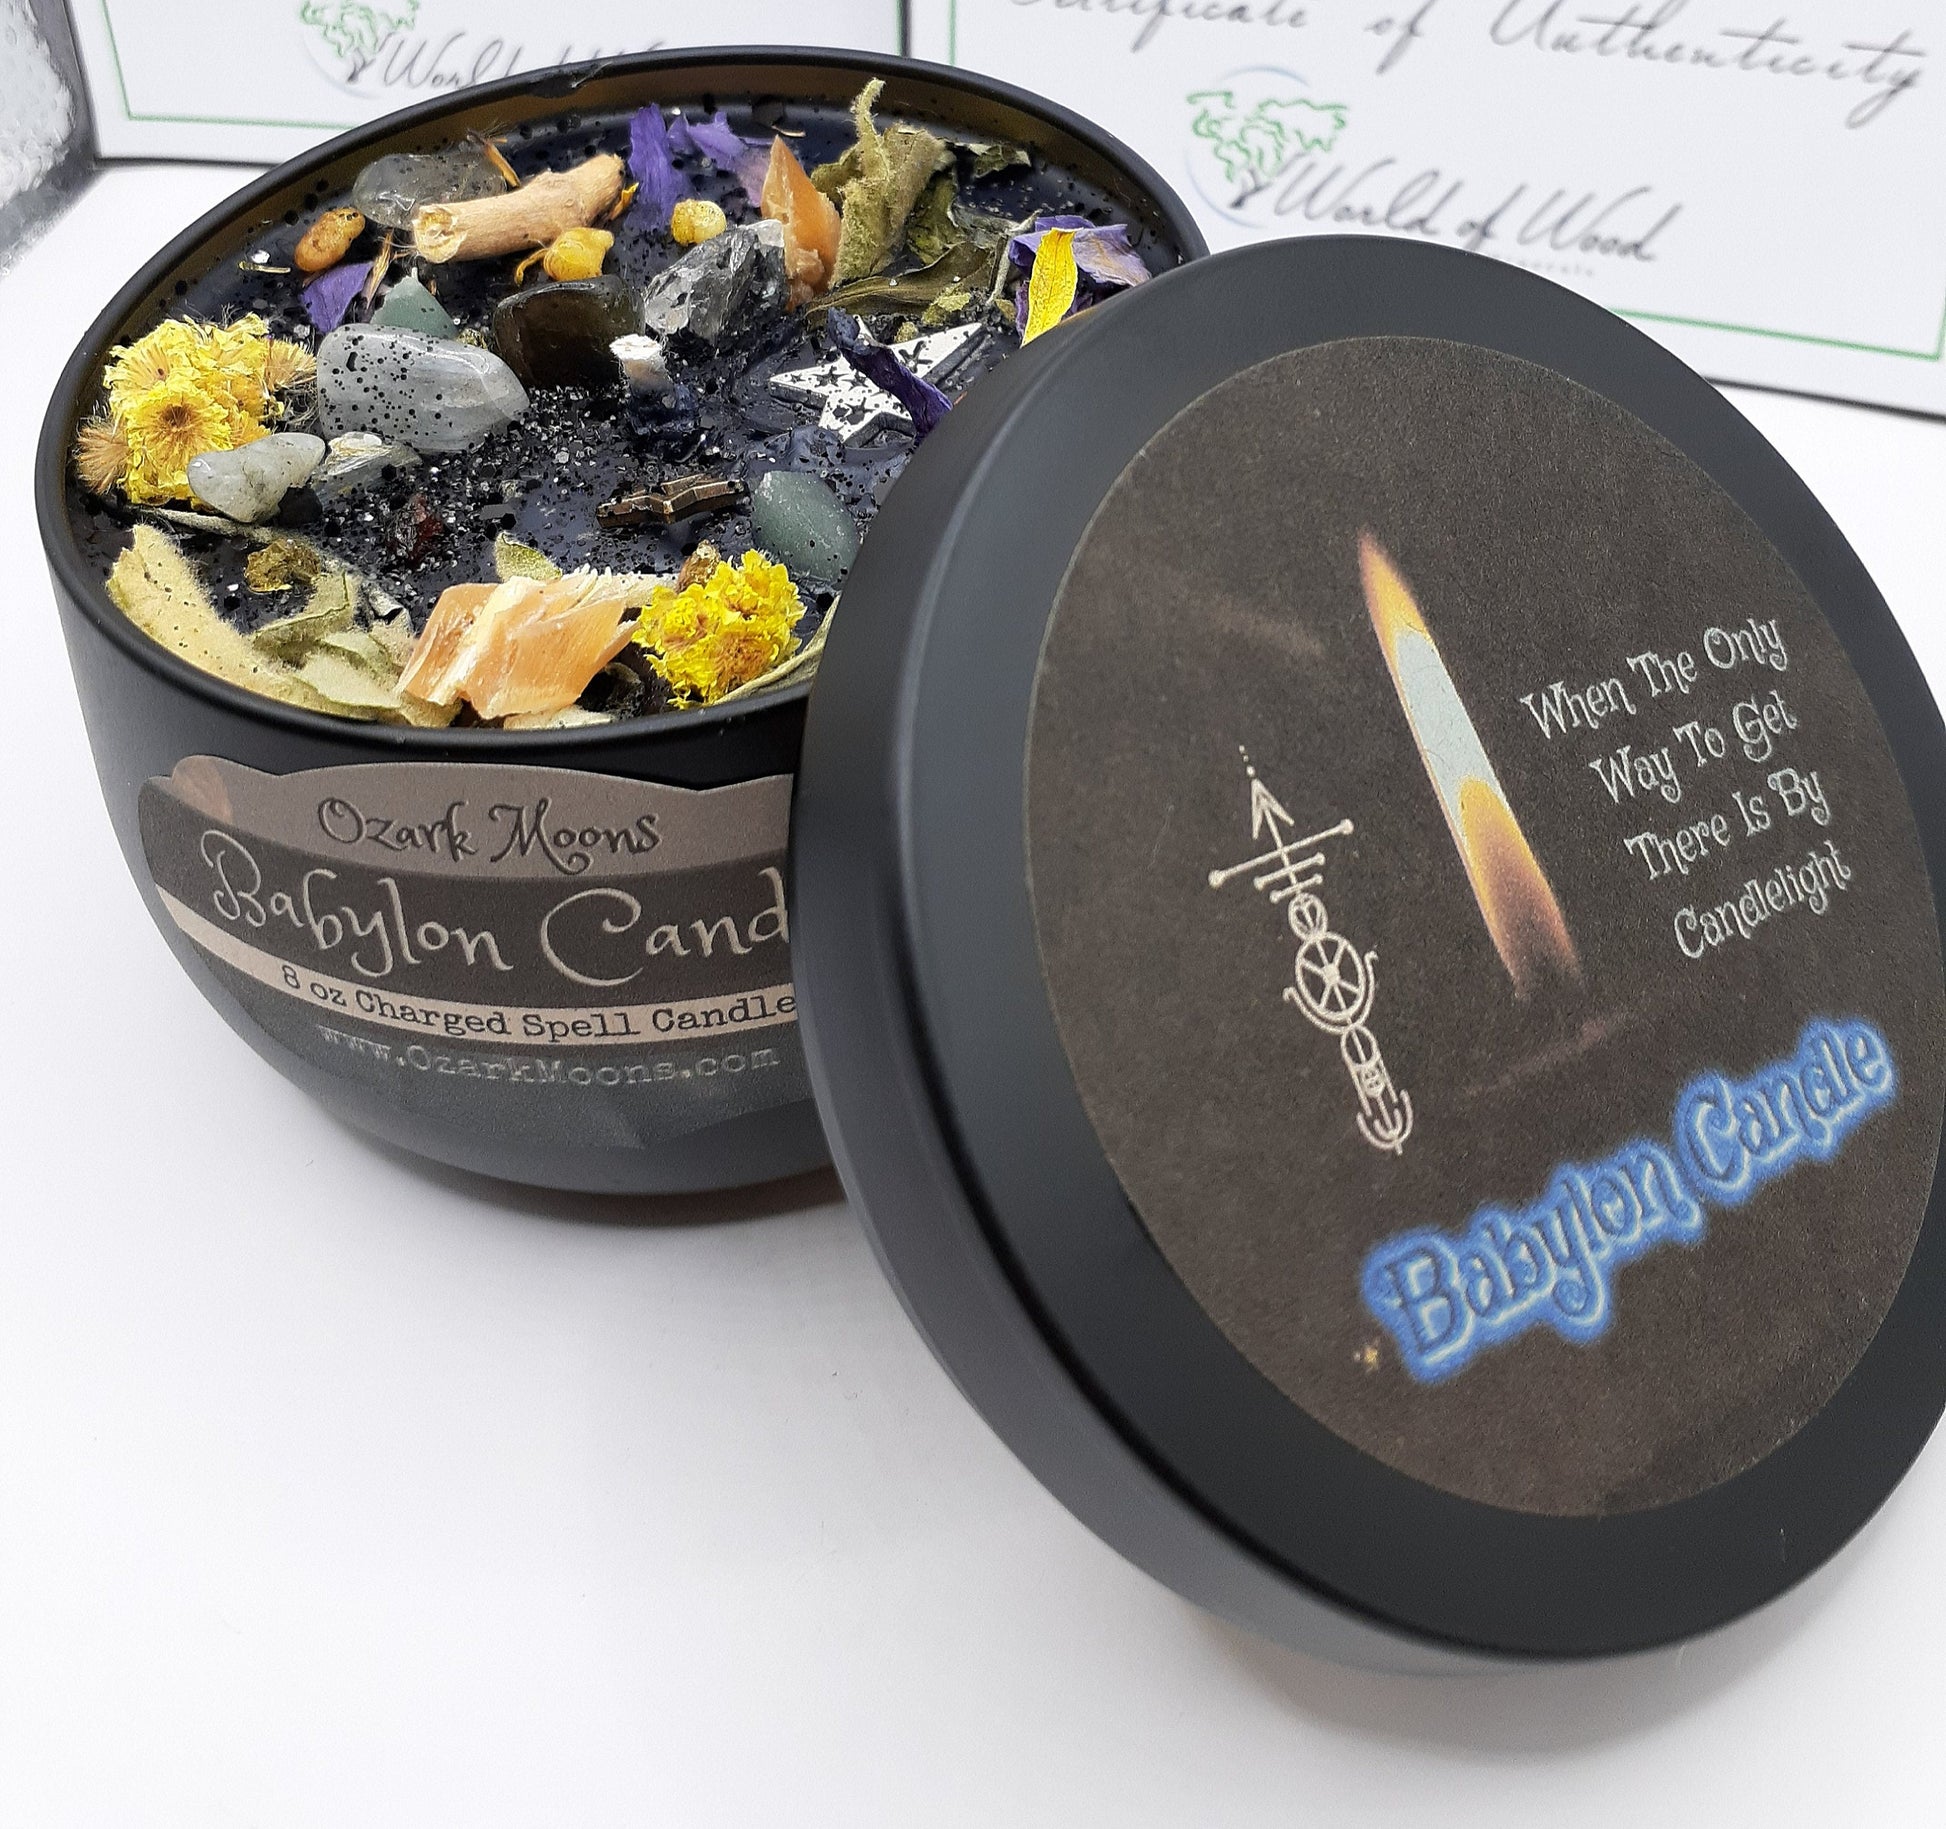 BABYLON CANDLE - Fully Charged and Dressed Spell Candle - When The Only Way To Get There Is By Candlelight Ritual Candle